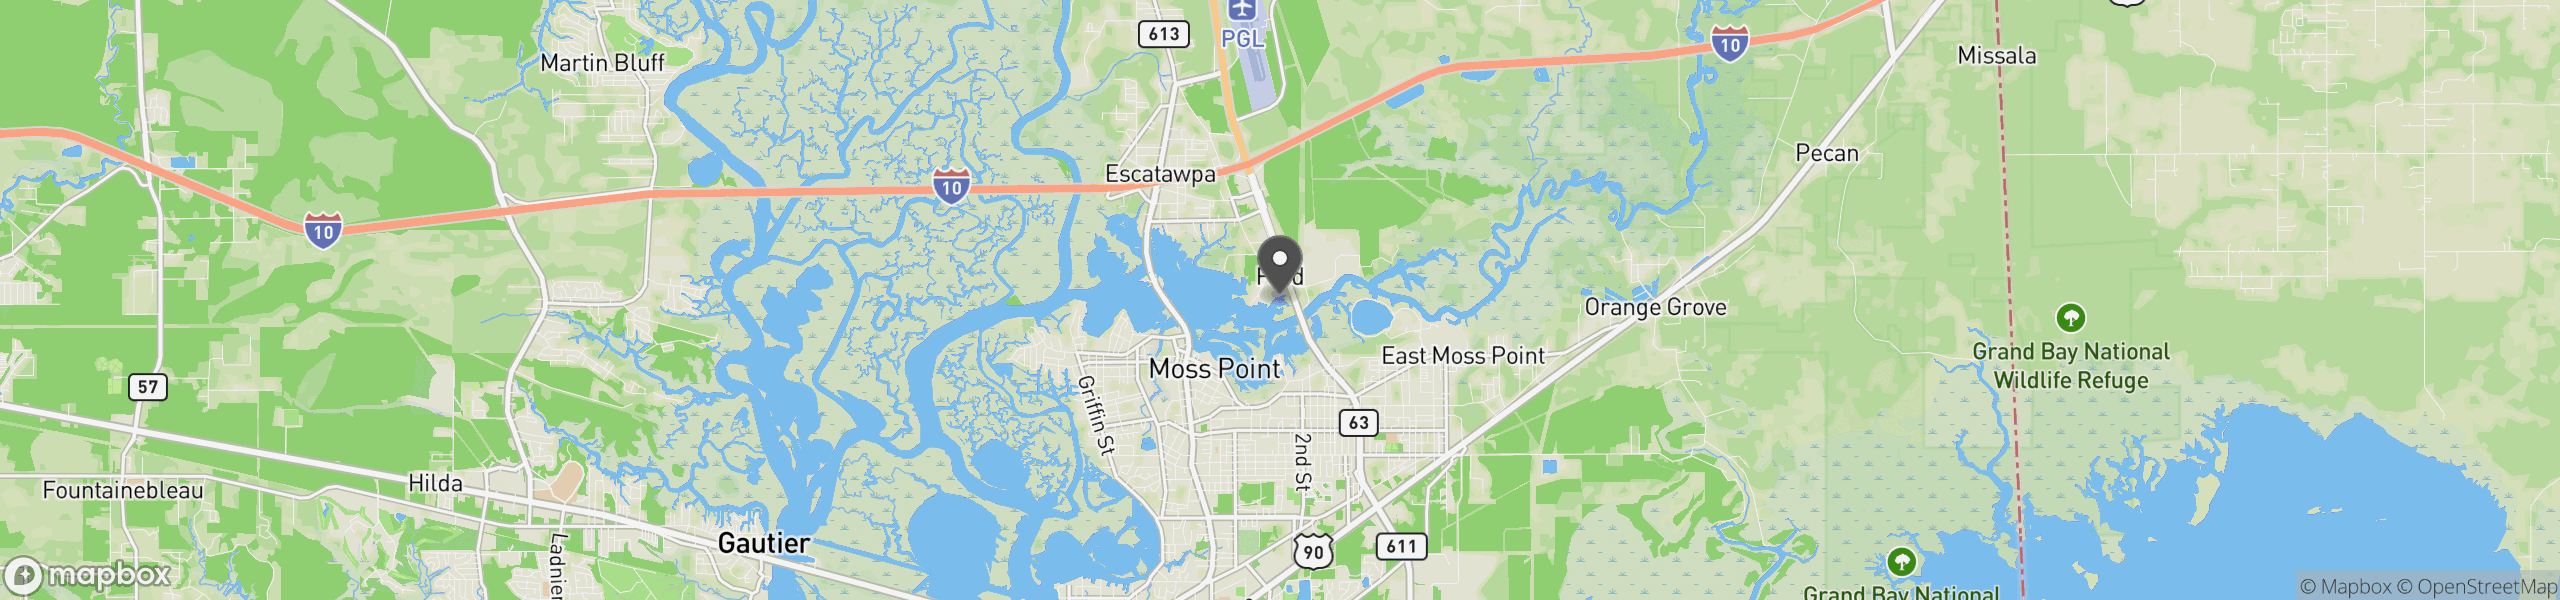 Moss Point, MS 39563